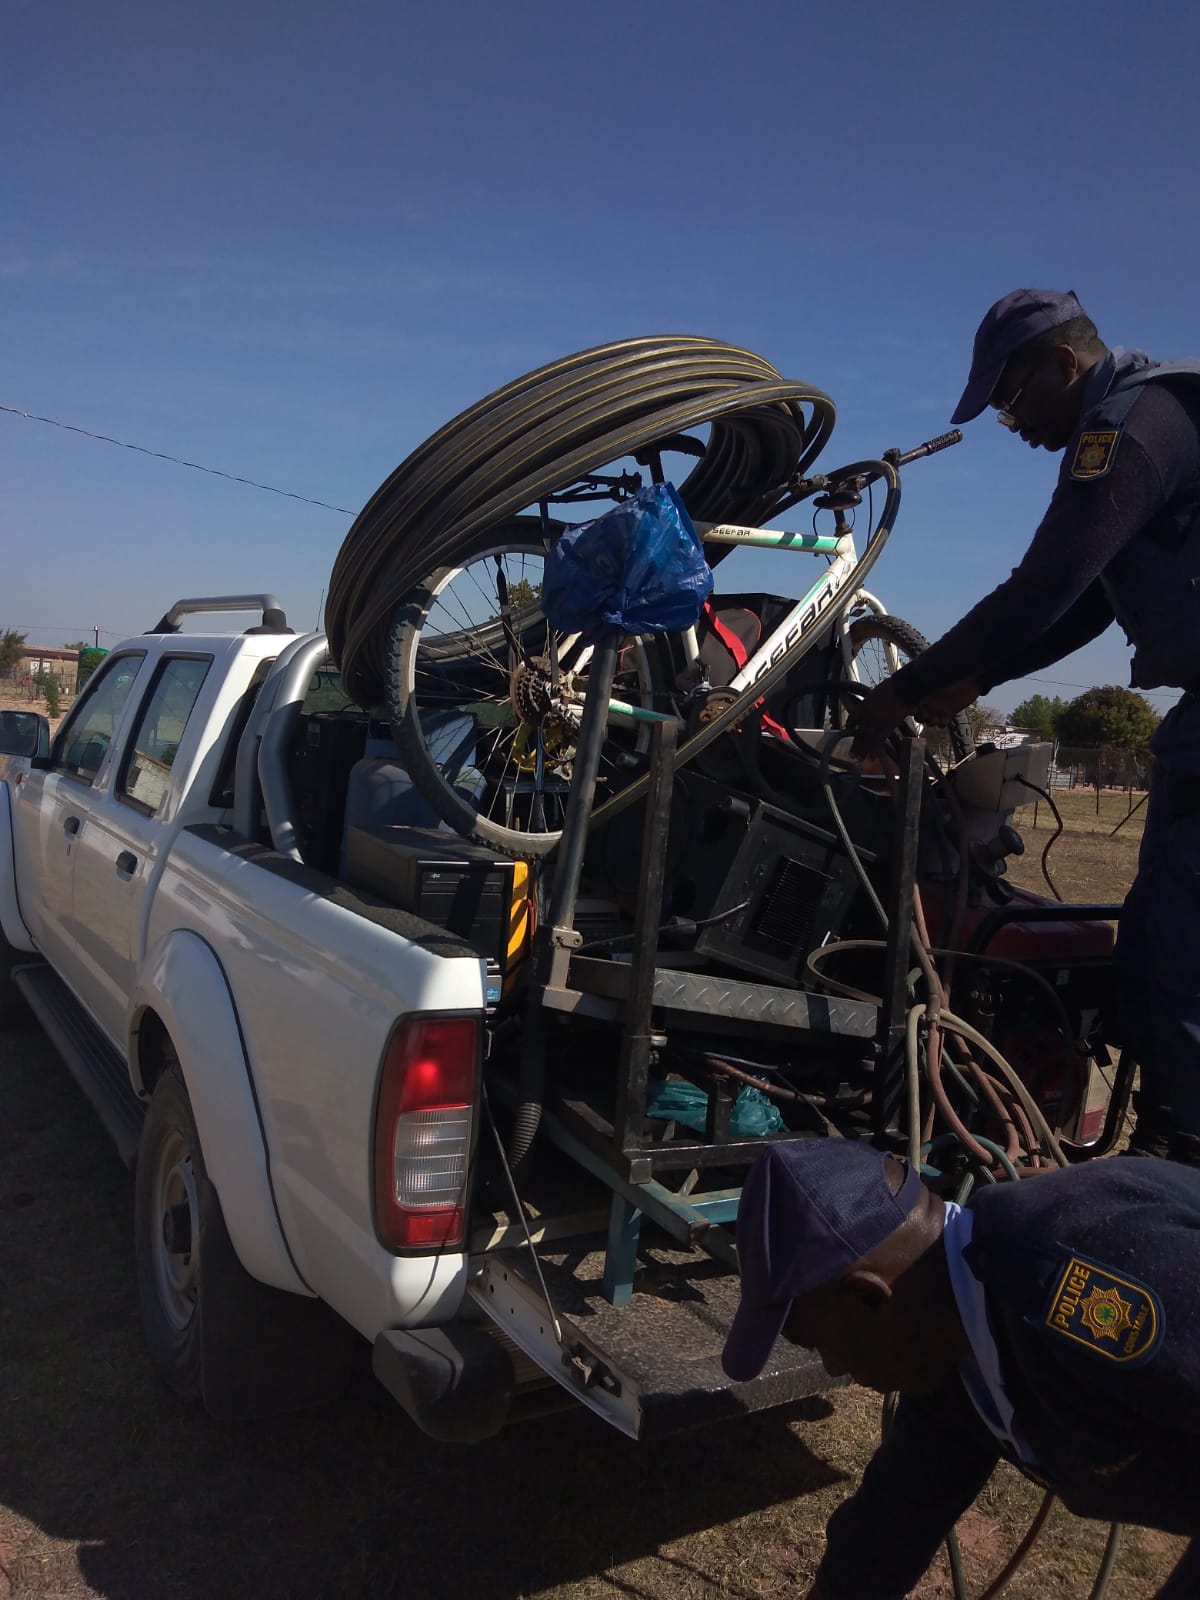 Seven suspects nabbed, stolen property and ammunition recovered